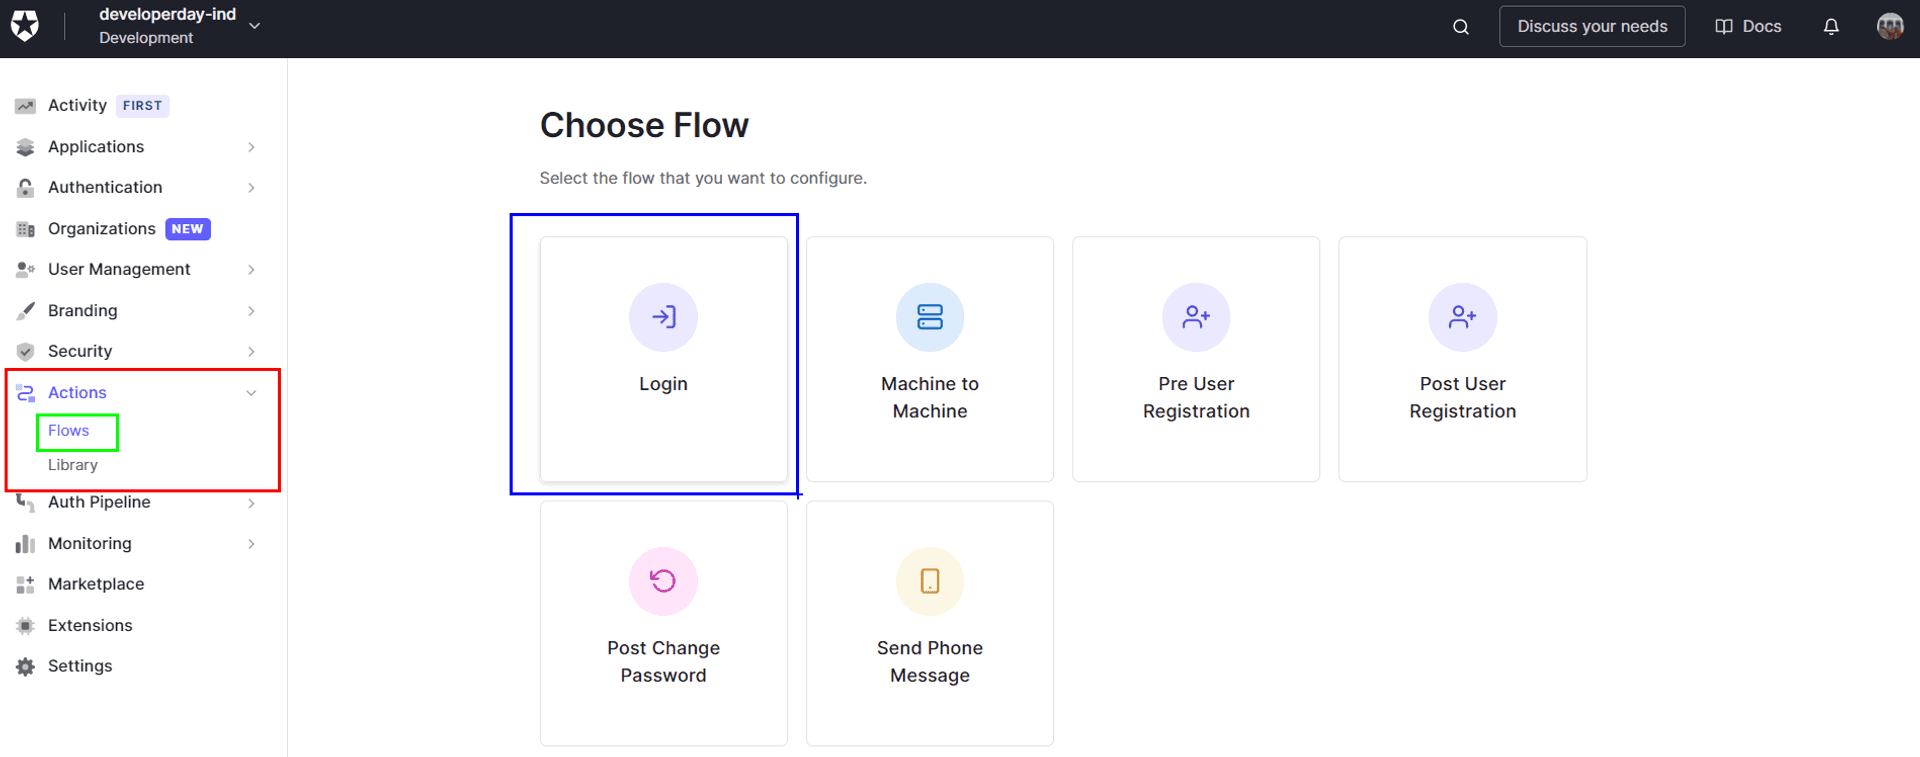 The Flow Page under the Action Tab is highlighted. The different available flows are listed in a card format